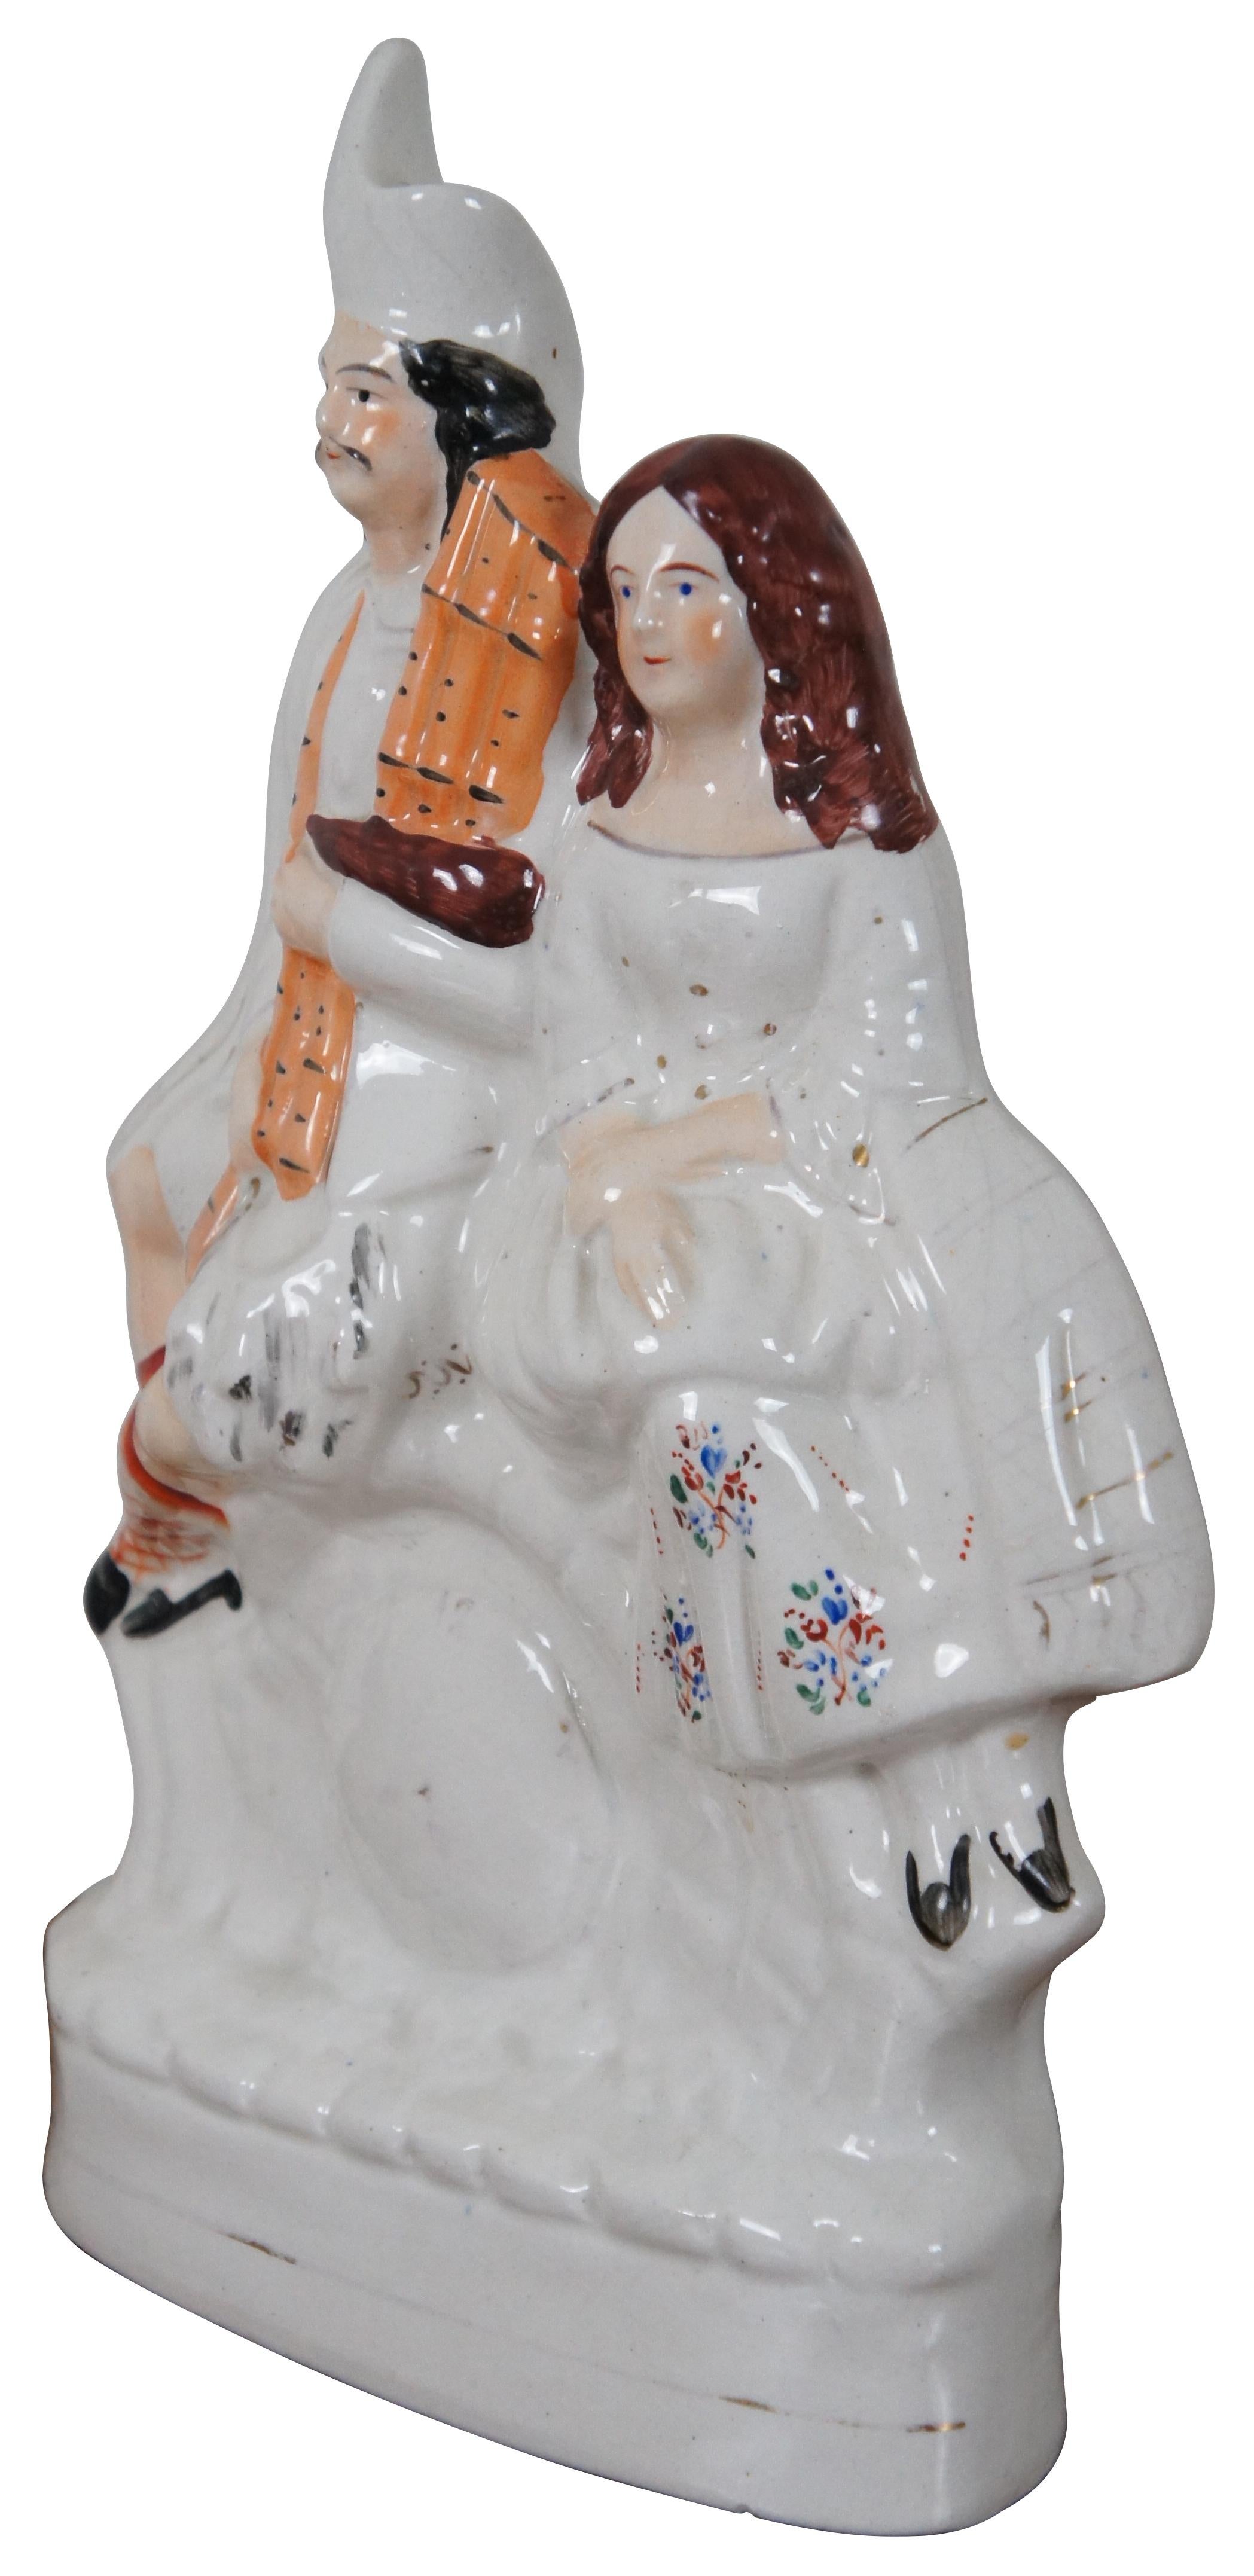 Antique circa 1870s Staffordshire porcelain figurine in the shape of a man and woman in Scottish clothing seated above a faux clock.